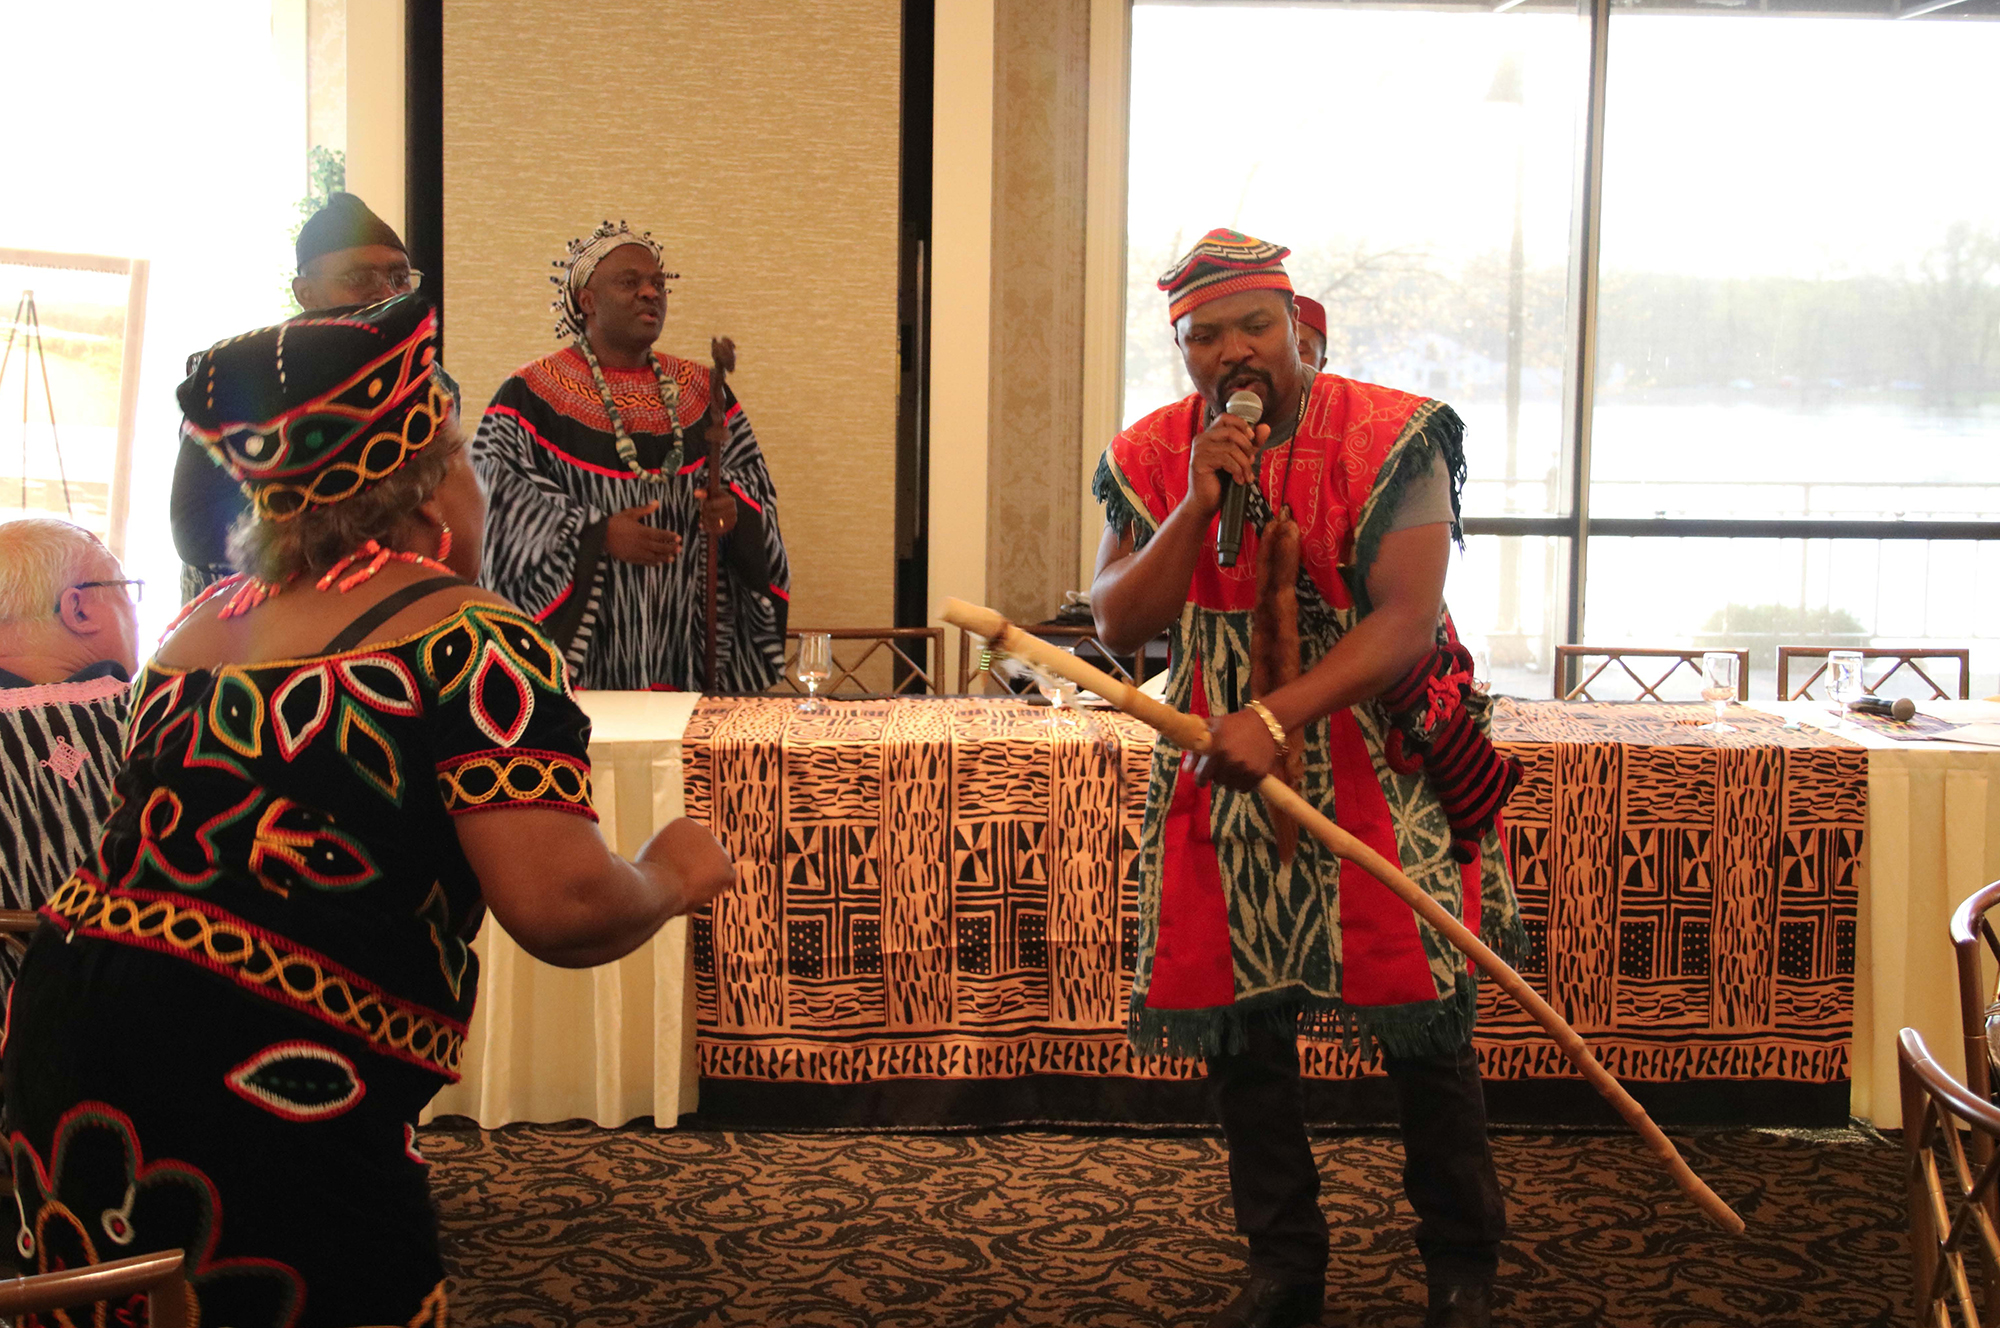 Traditional Cameroon singing and dancing at a town hall meeting in La Crosse last week to draw attention to the troubles in Cameroon.